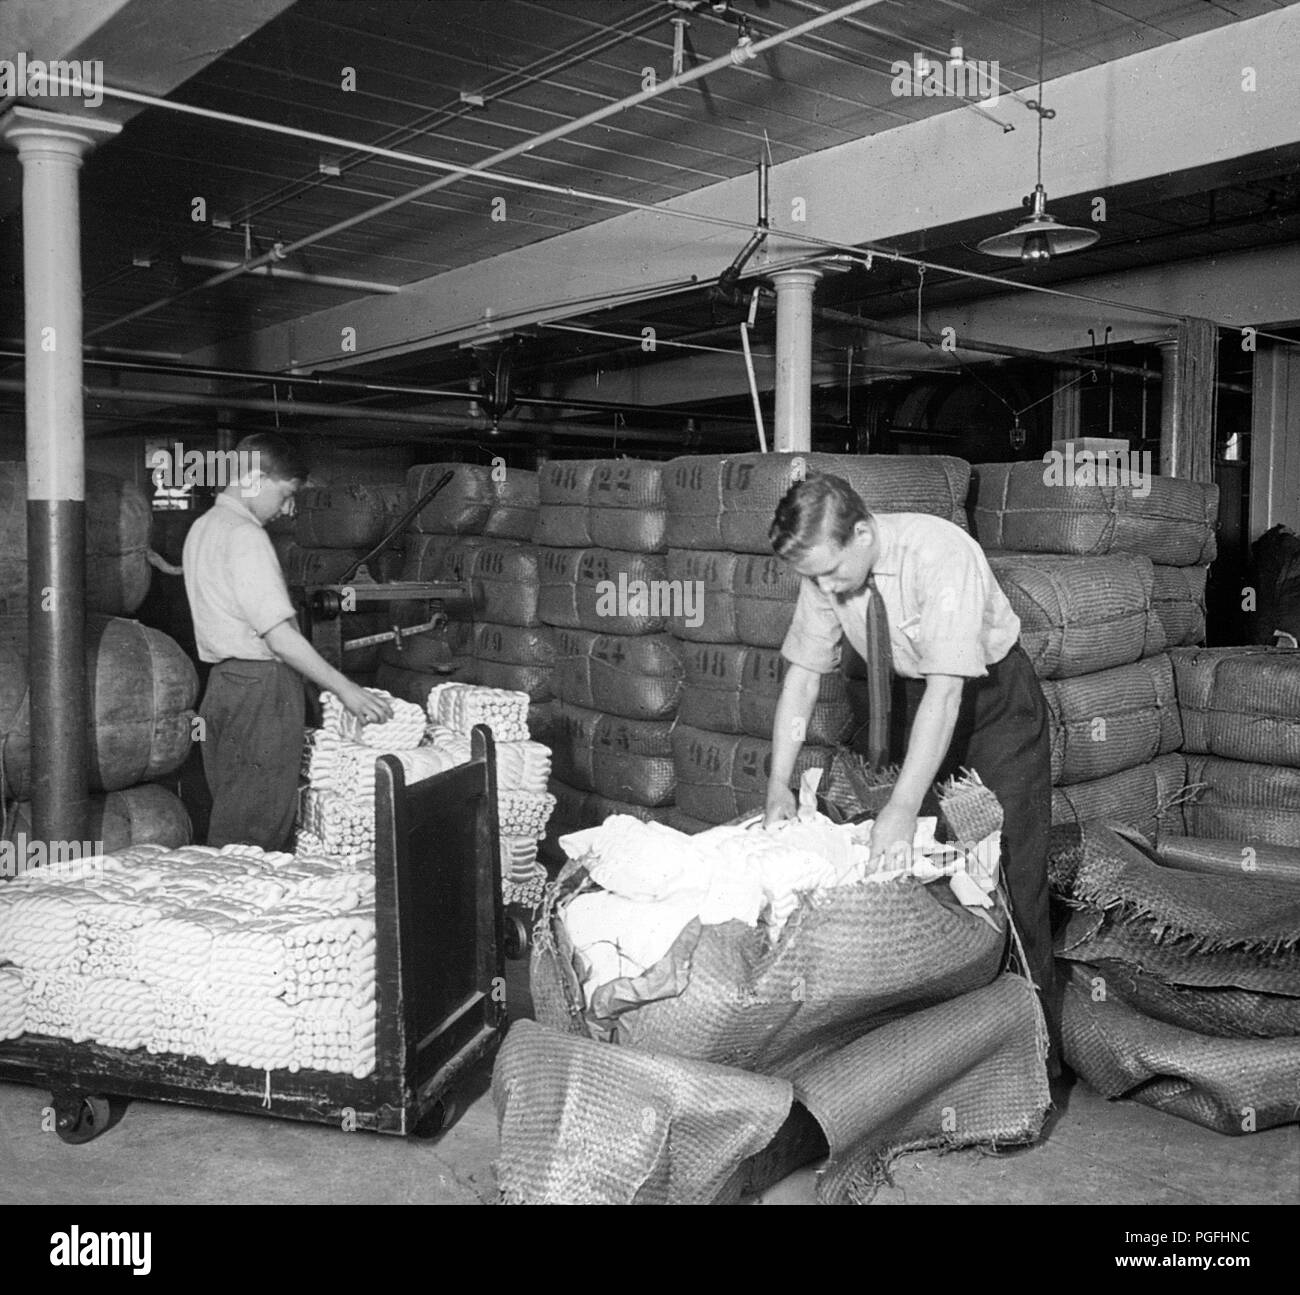 [ c. 1900s USA - Silk Industry ] —   Opening bales of raw silk at a warehouse in Manchester, Connecticut, USA. Raw silk was imported from Japan, China and Italy.  20th century vintage glass slide. Stock Photo